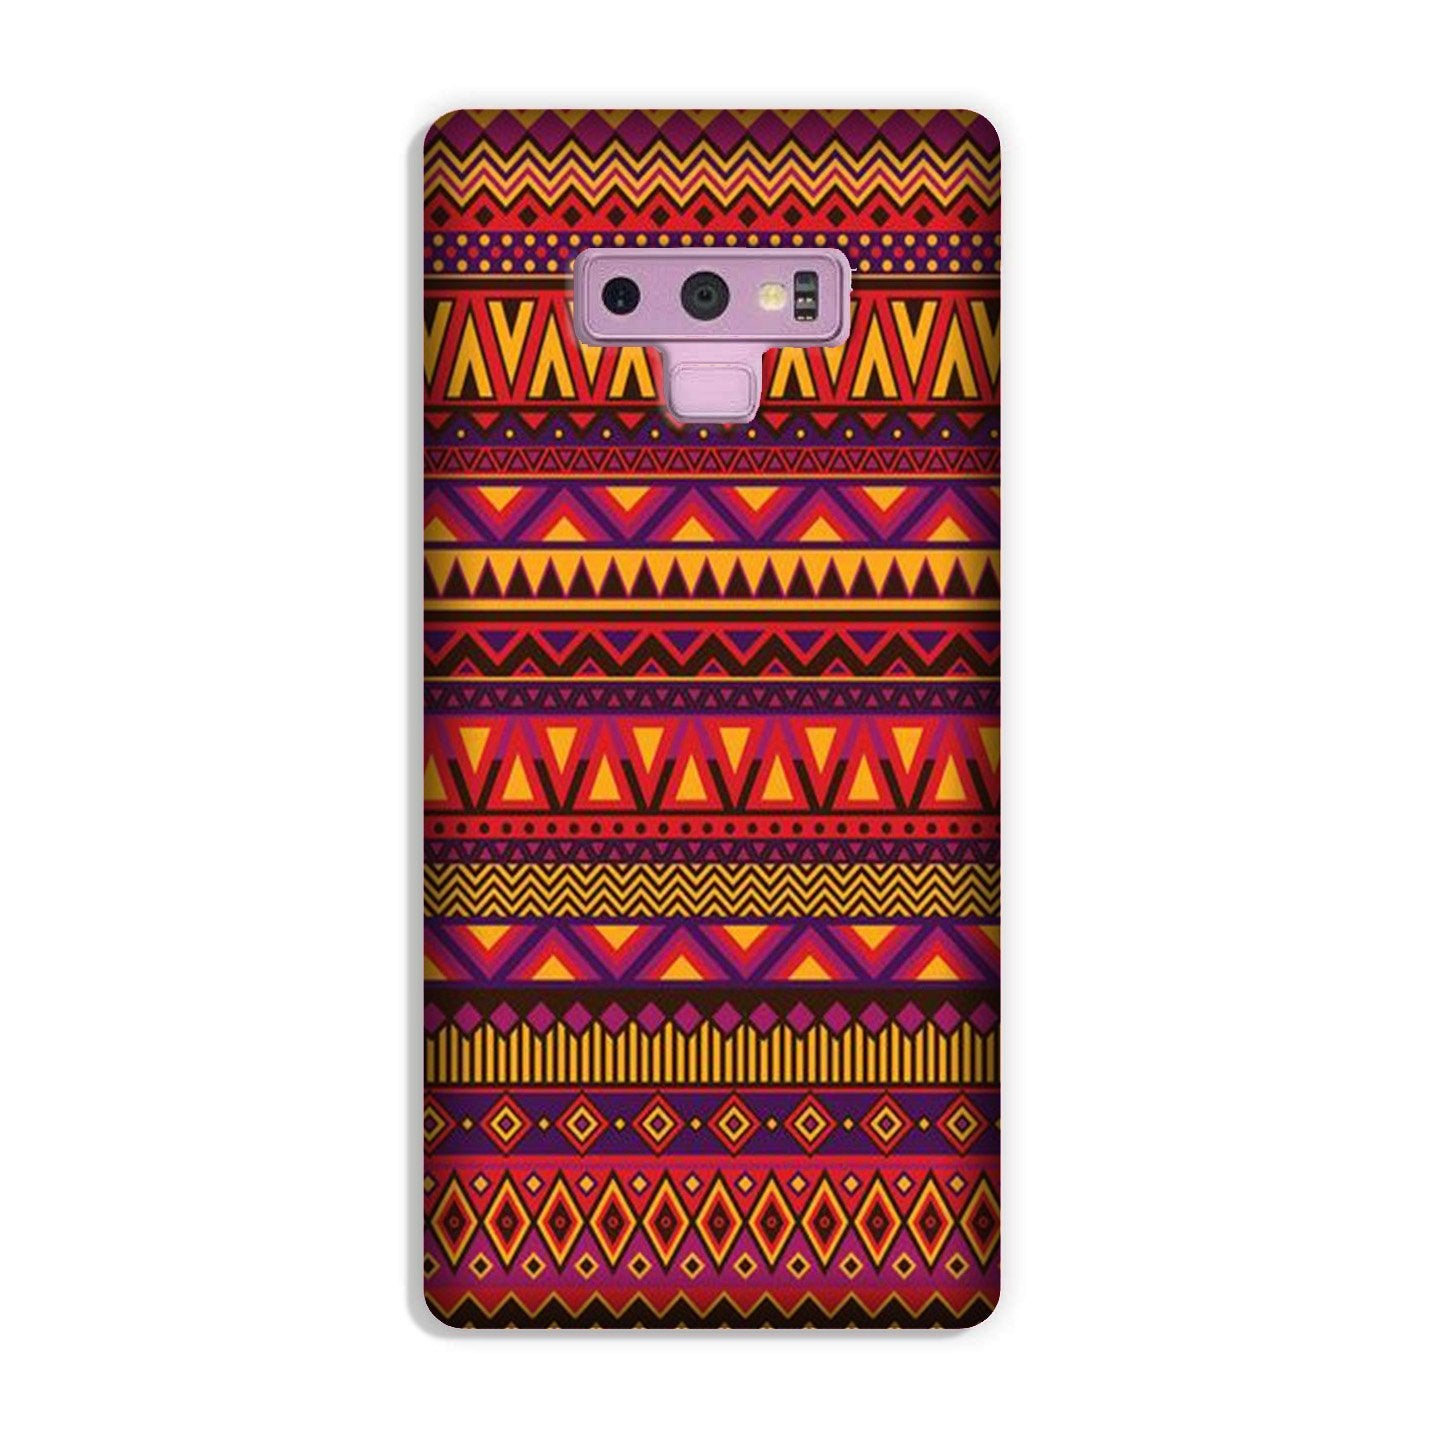 Zigzag line pattern2 Case for Galaxy Note 9